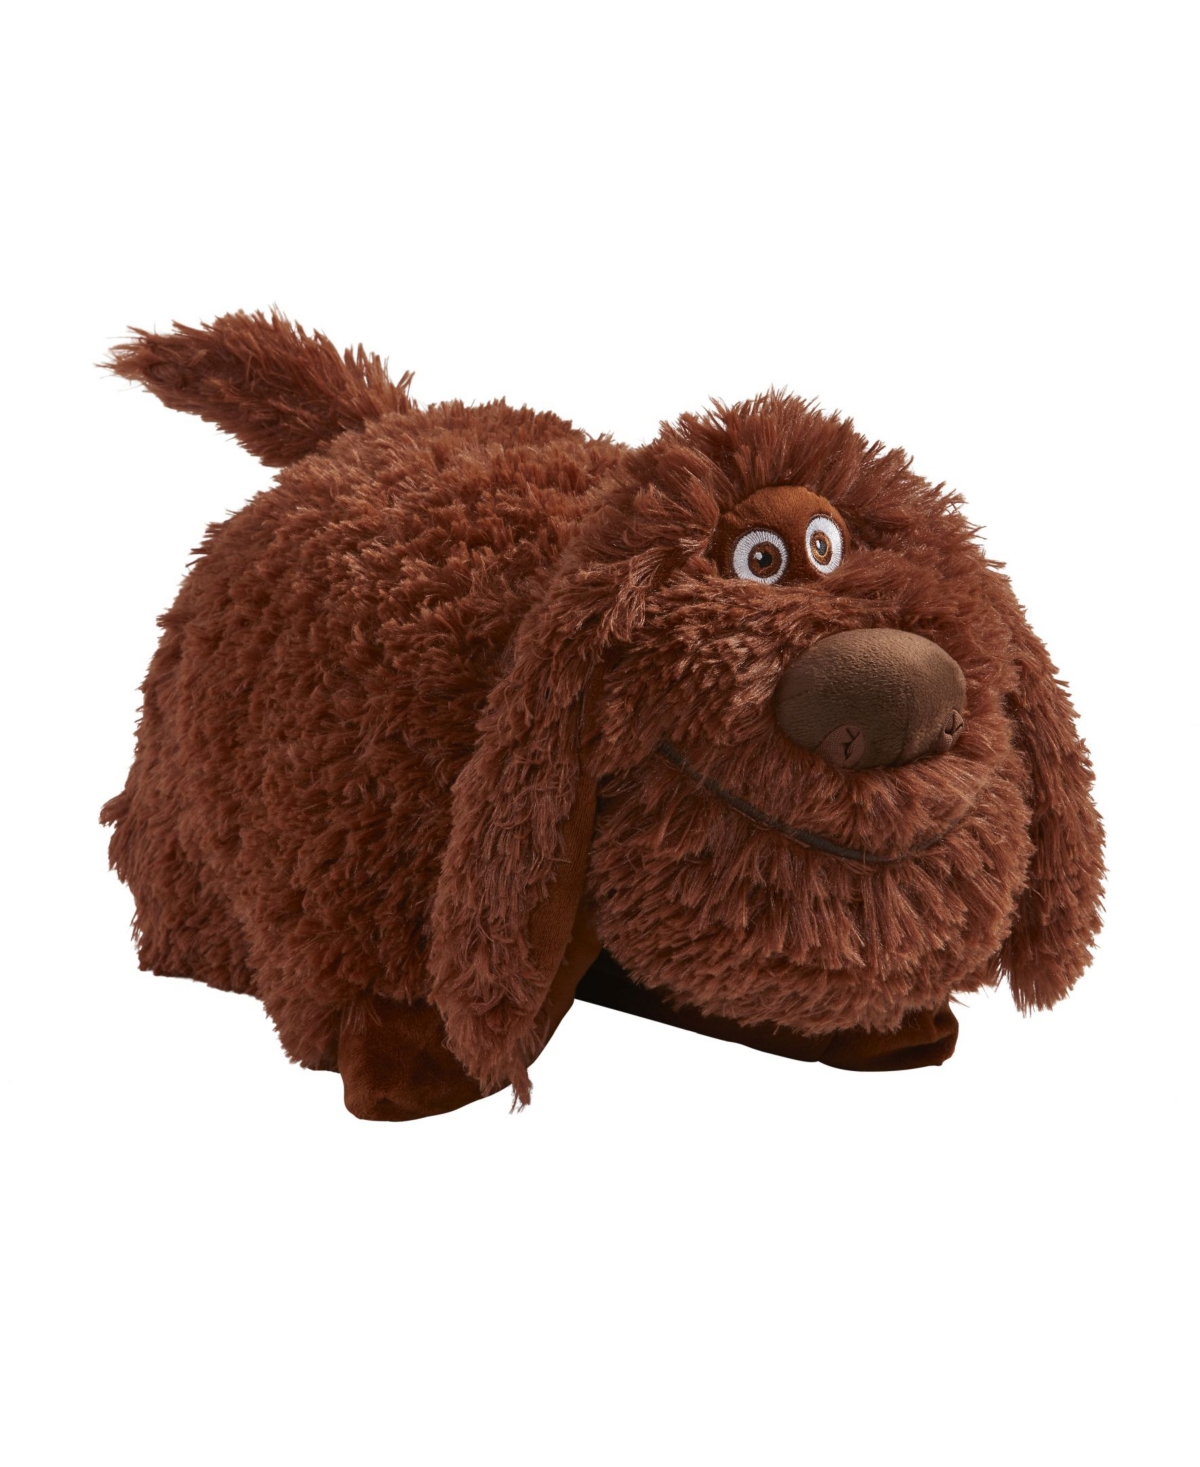 Pillow Pets Nbcuniversal The Secret Life Of Pets Duke Stuffed Animal Plush Toy In Brown